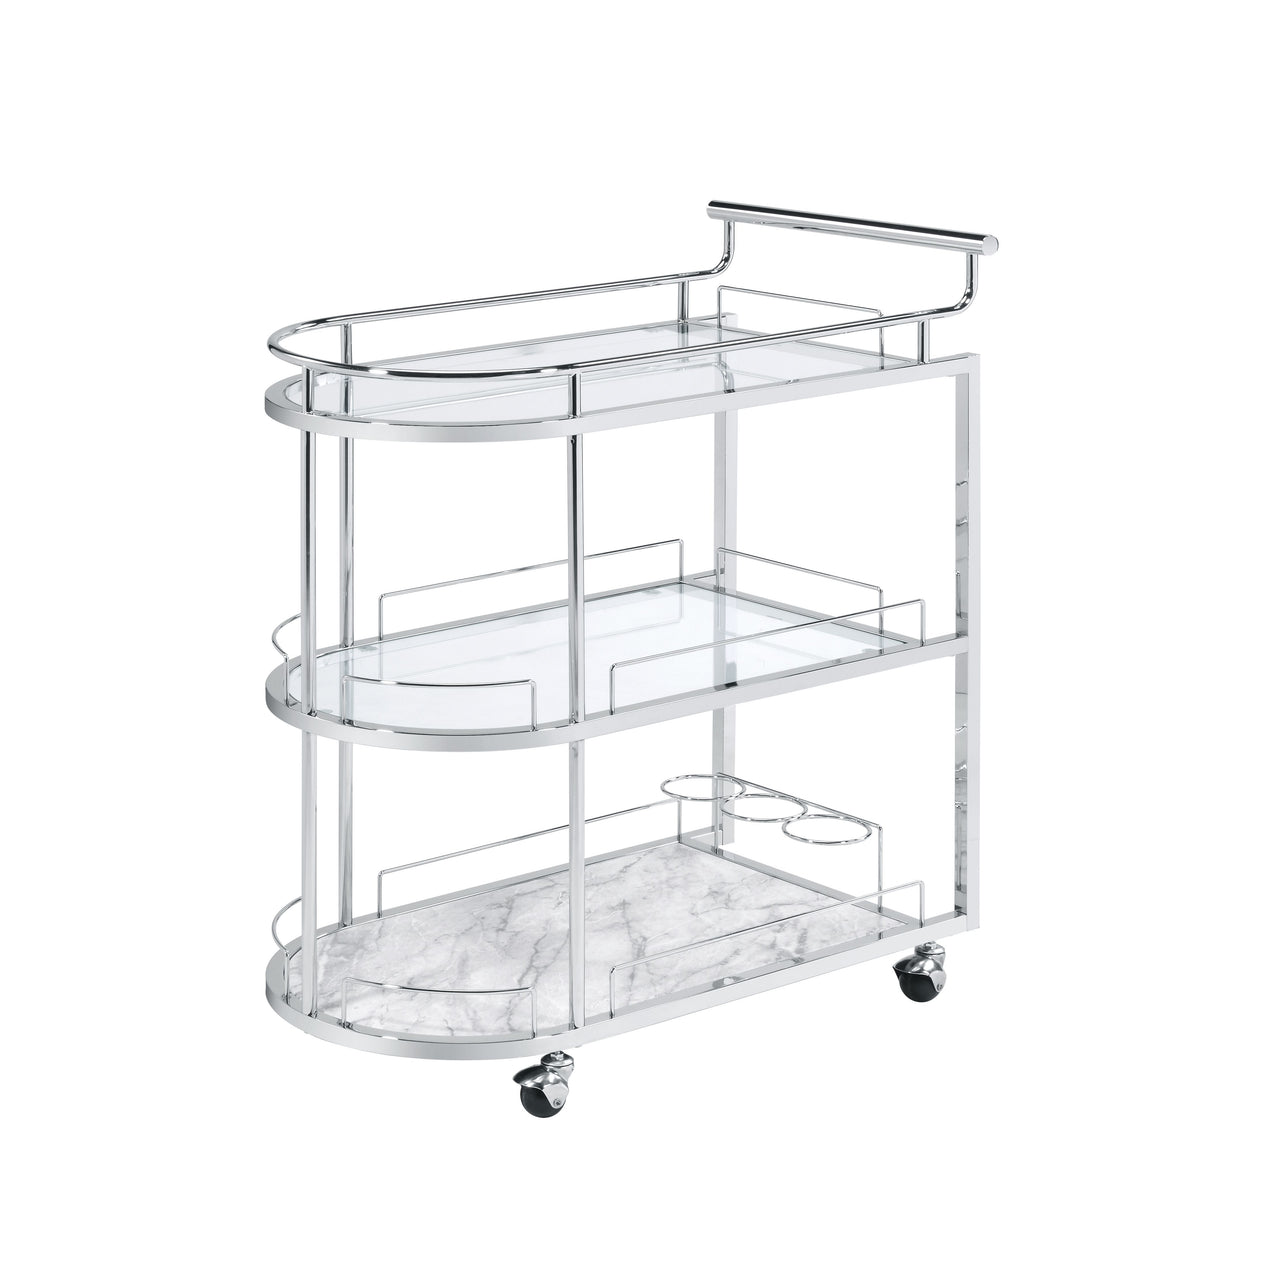 Inyo - Serving Cart - Clear Glass & Chrome Finish - Tony's Home Furnishings